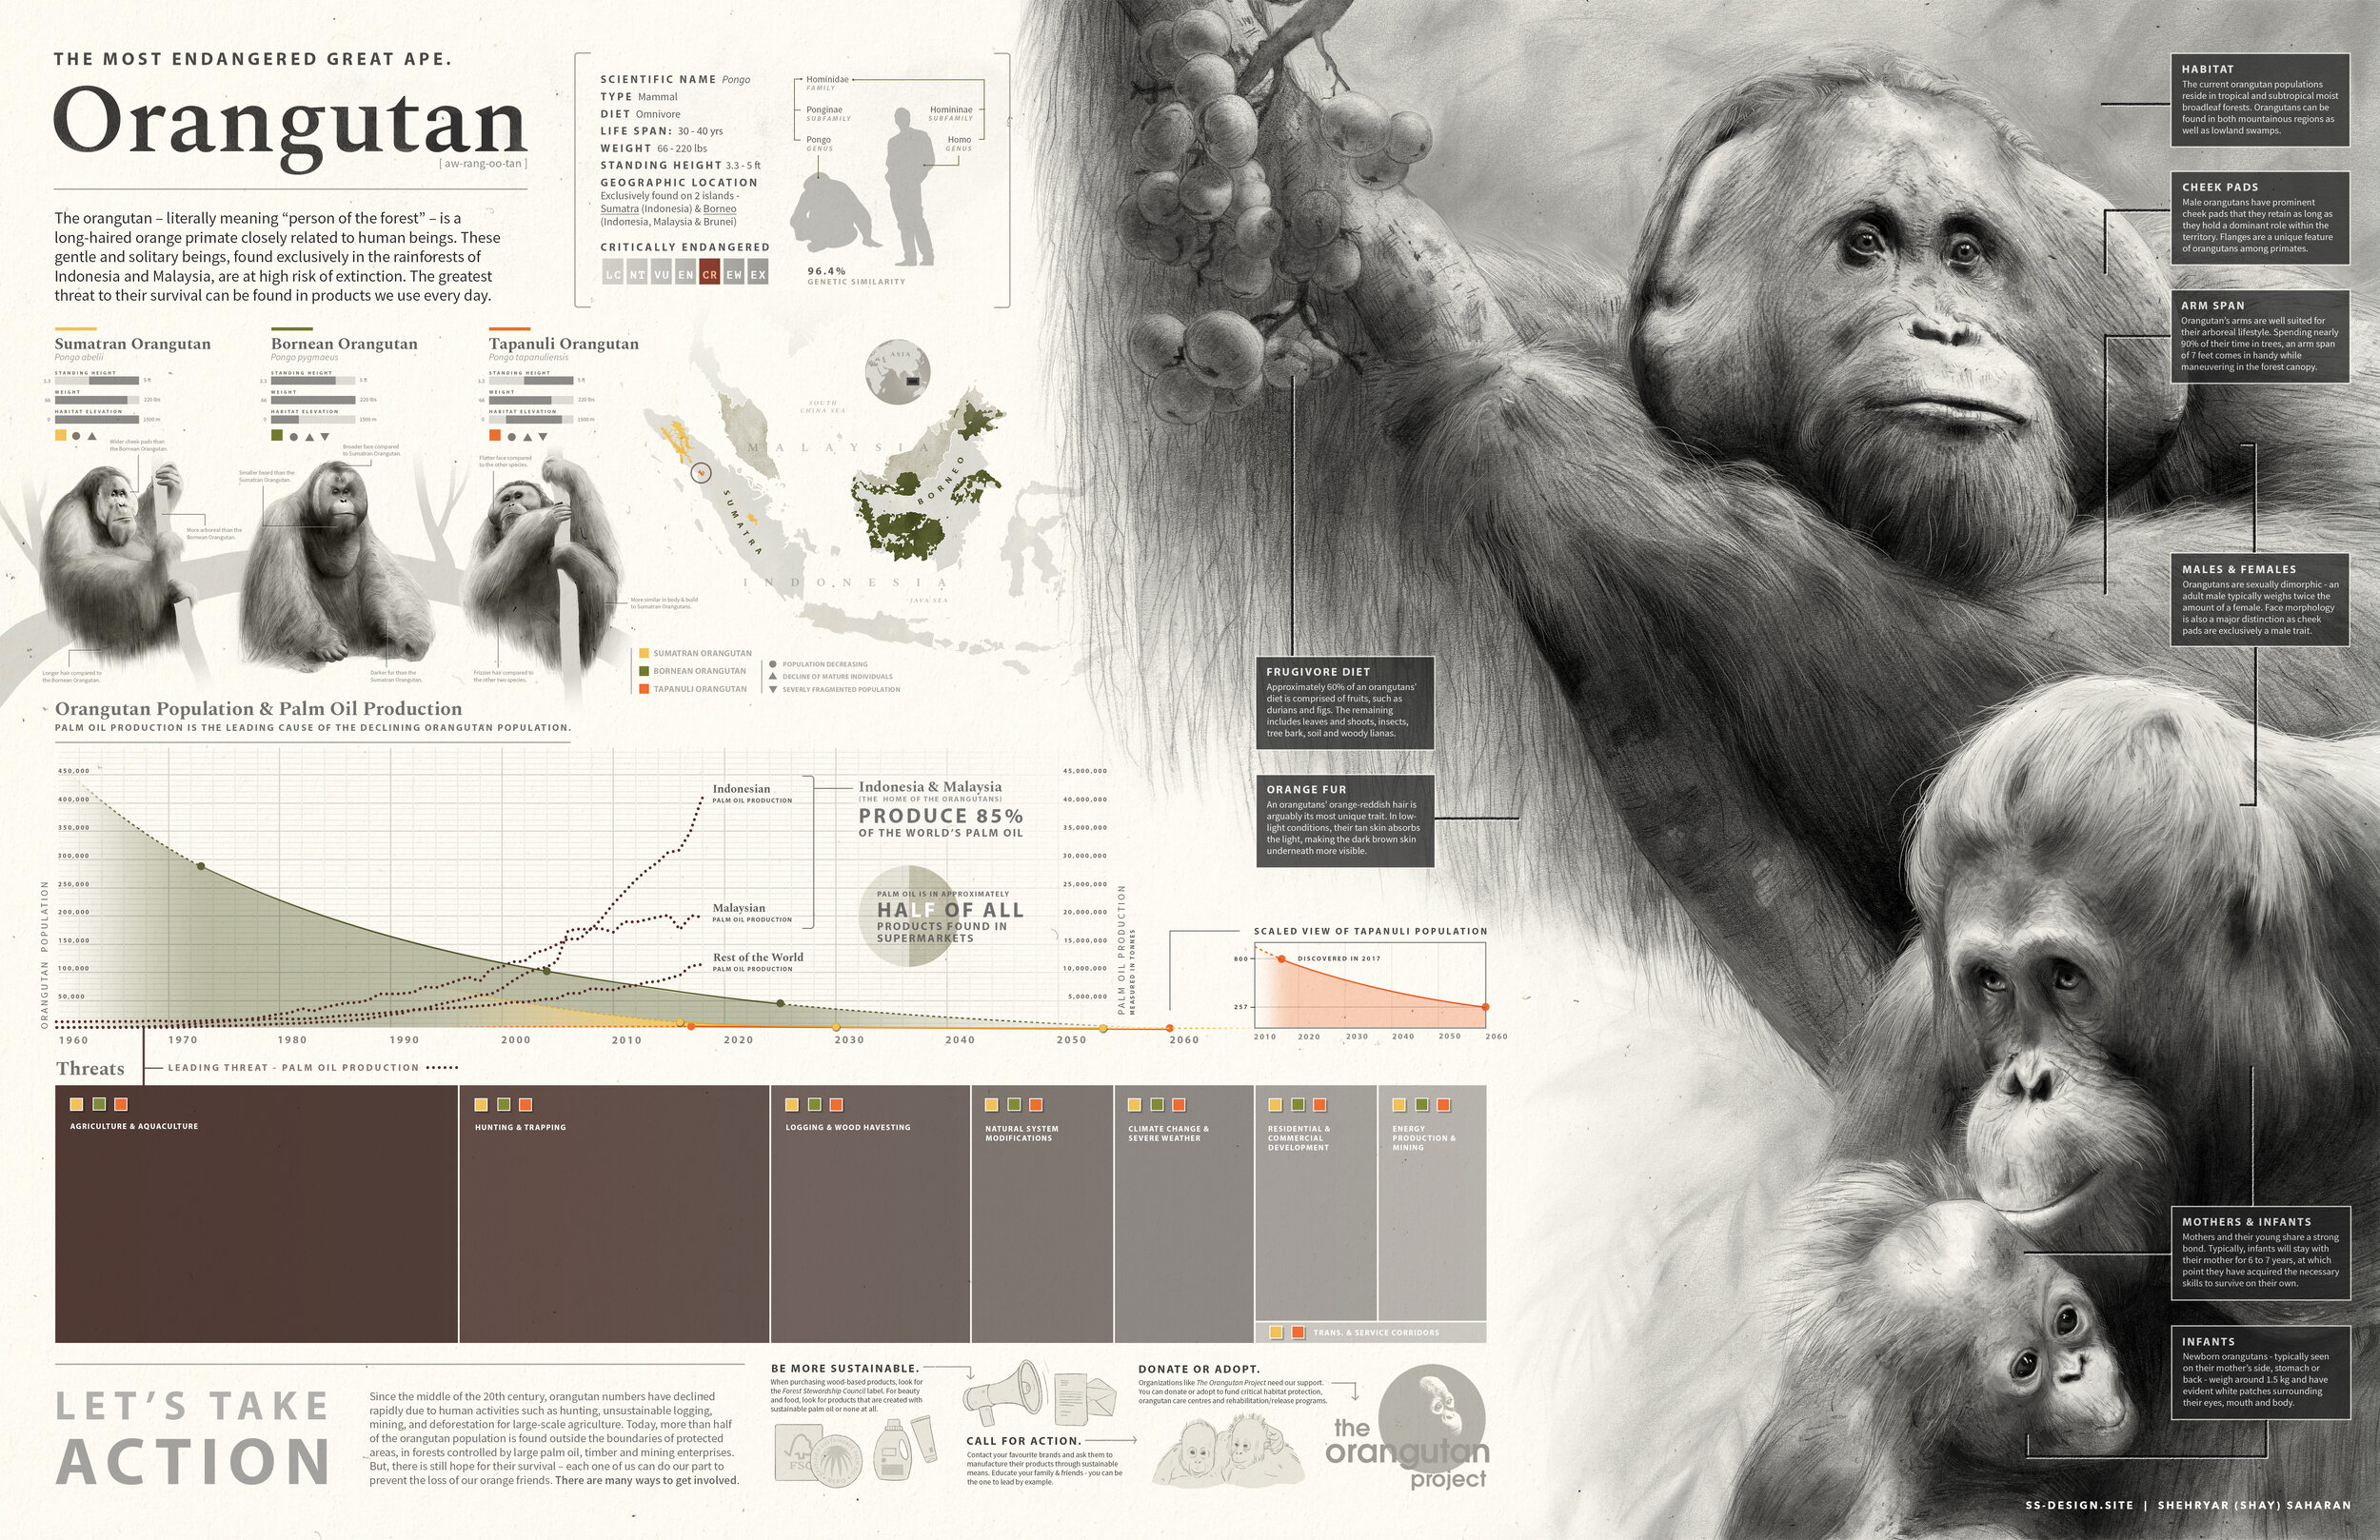 The most endangered great ape: Infographic on threats to the orangutan population.